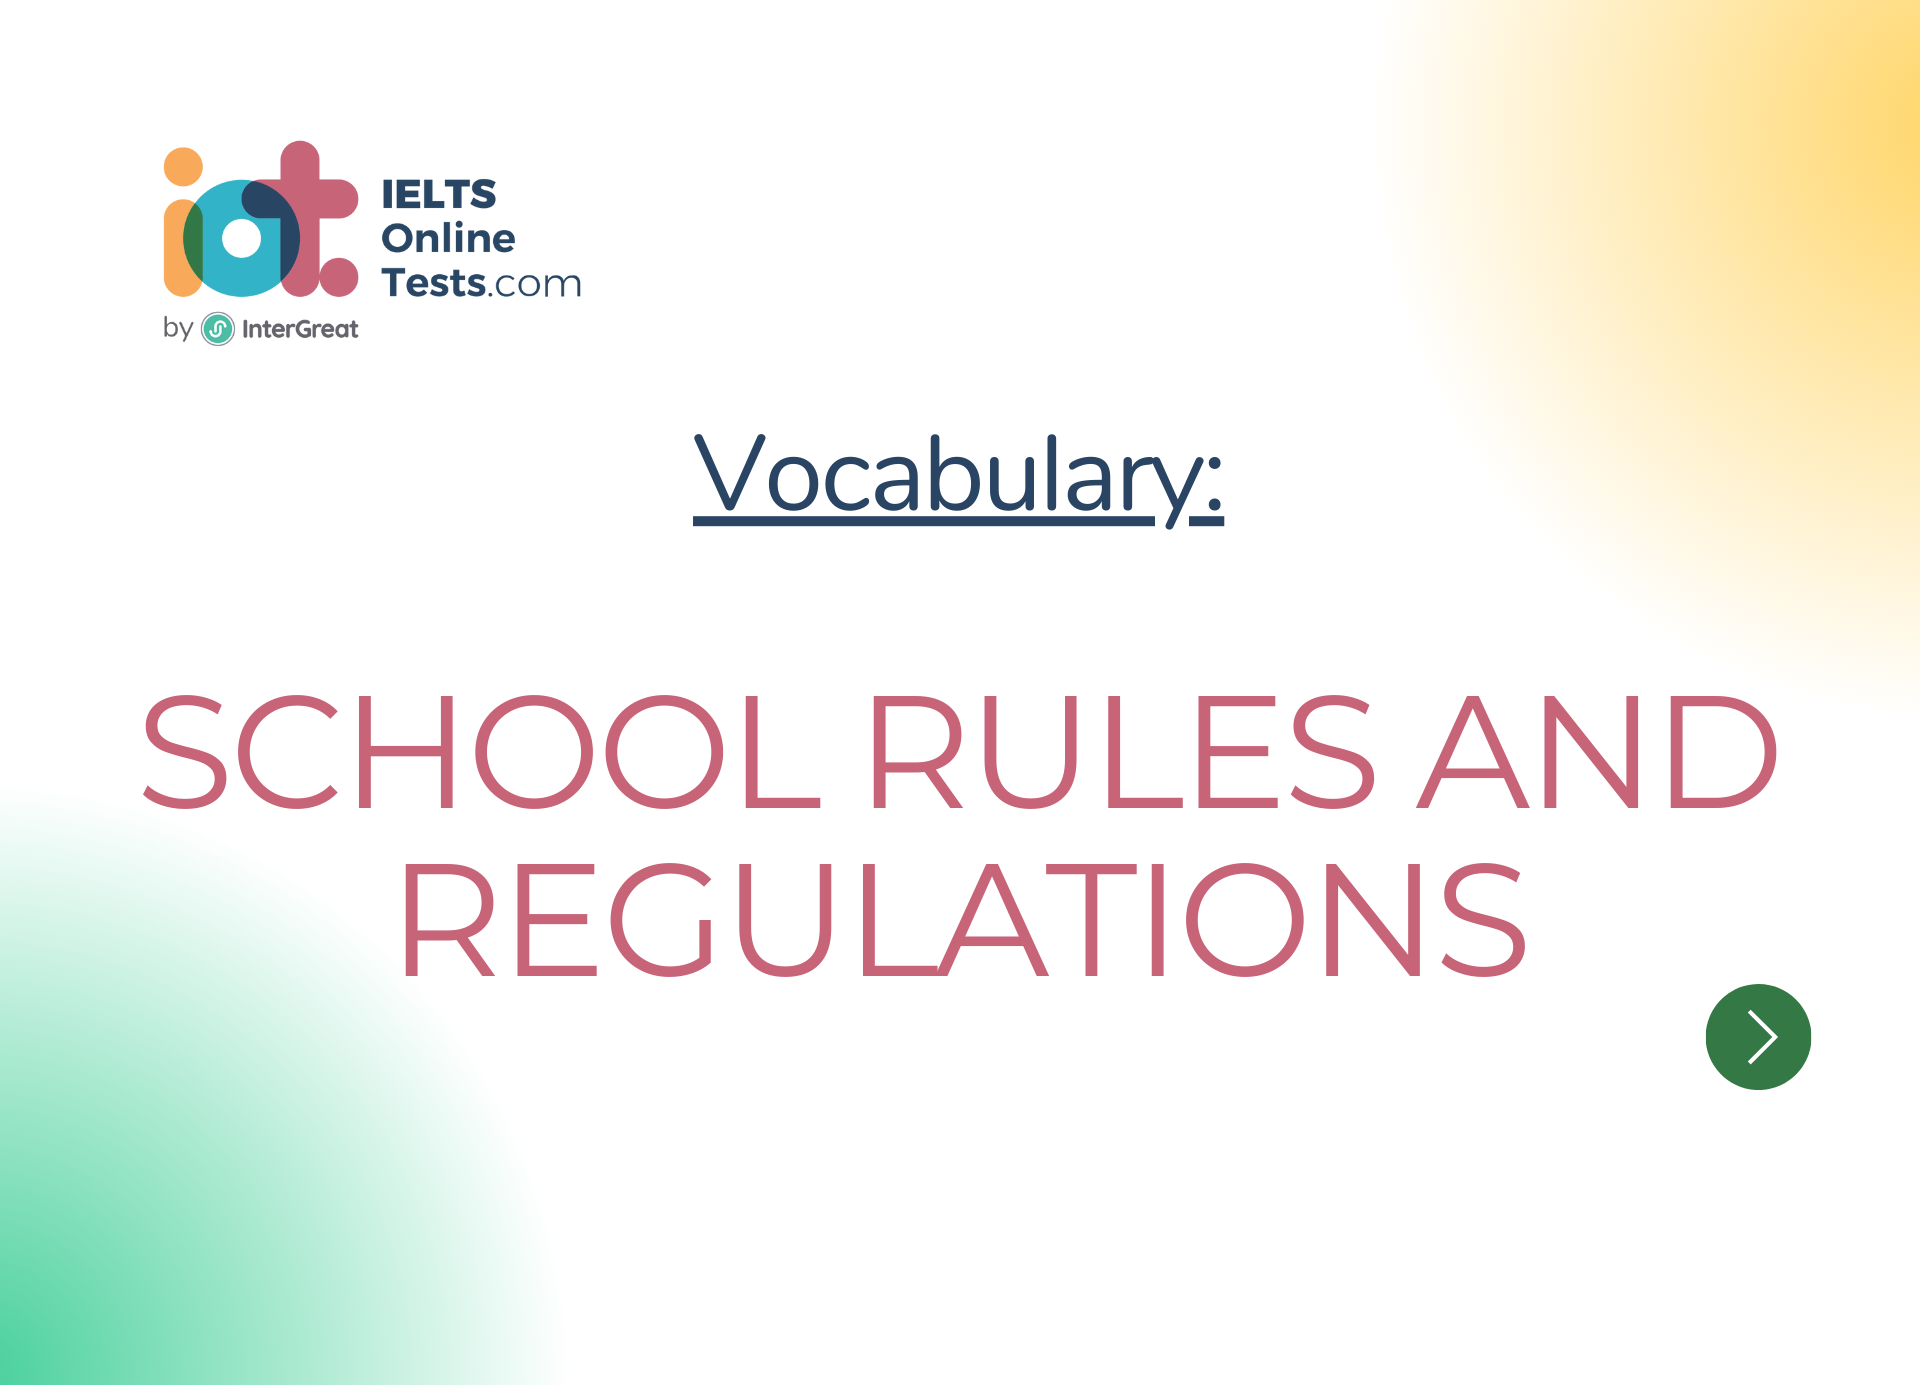 School rules and regulations IELTS Online Tests